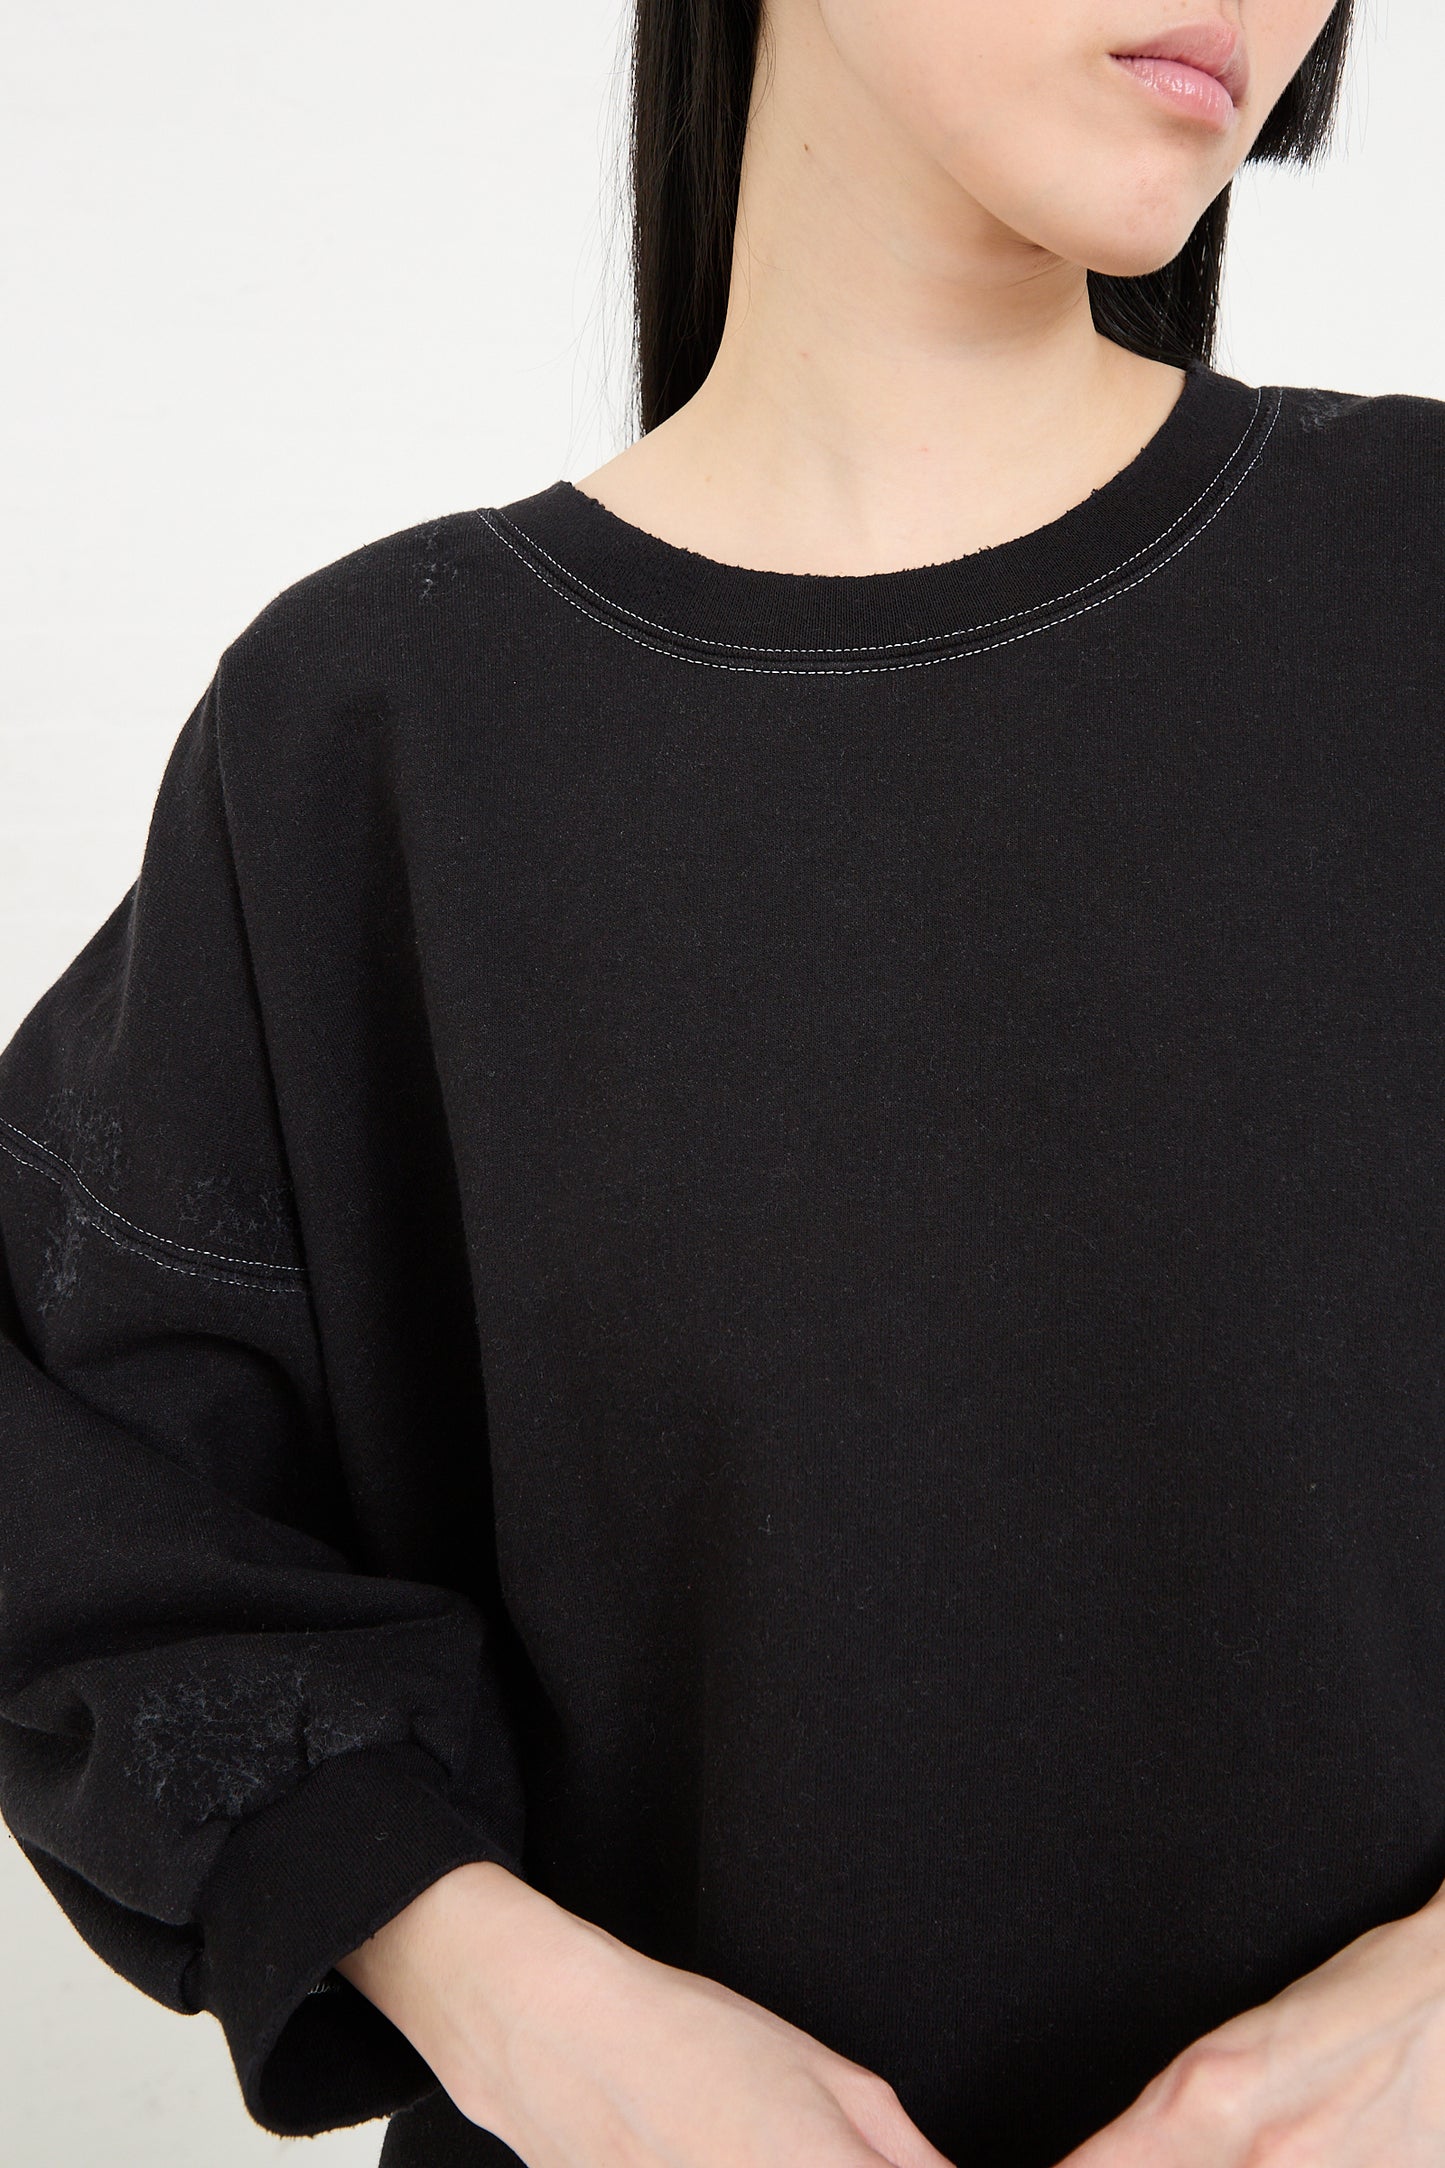 A person wearing a Rachel Comey Fond Sweatshirt in Charcoal, a plain black, genderless oversized sweatshirt with a round neck, with a partial view of their profile.